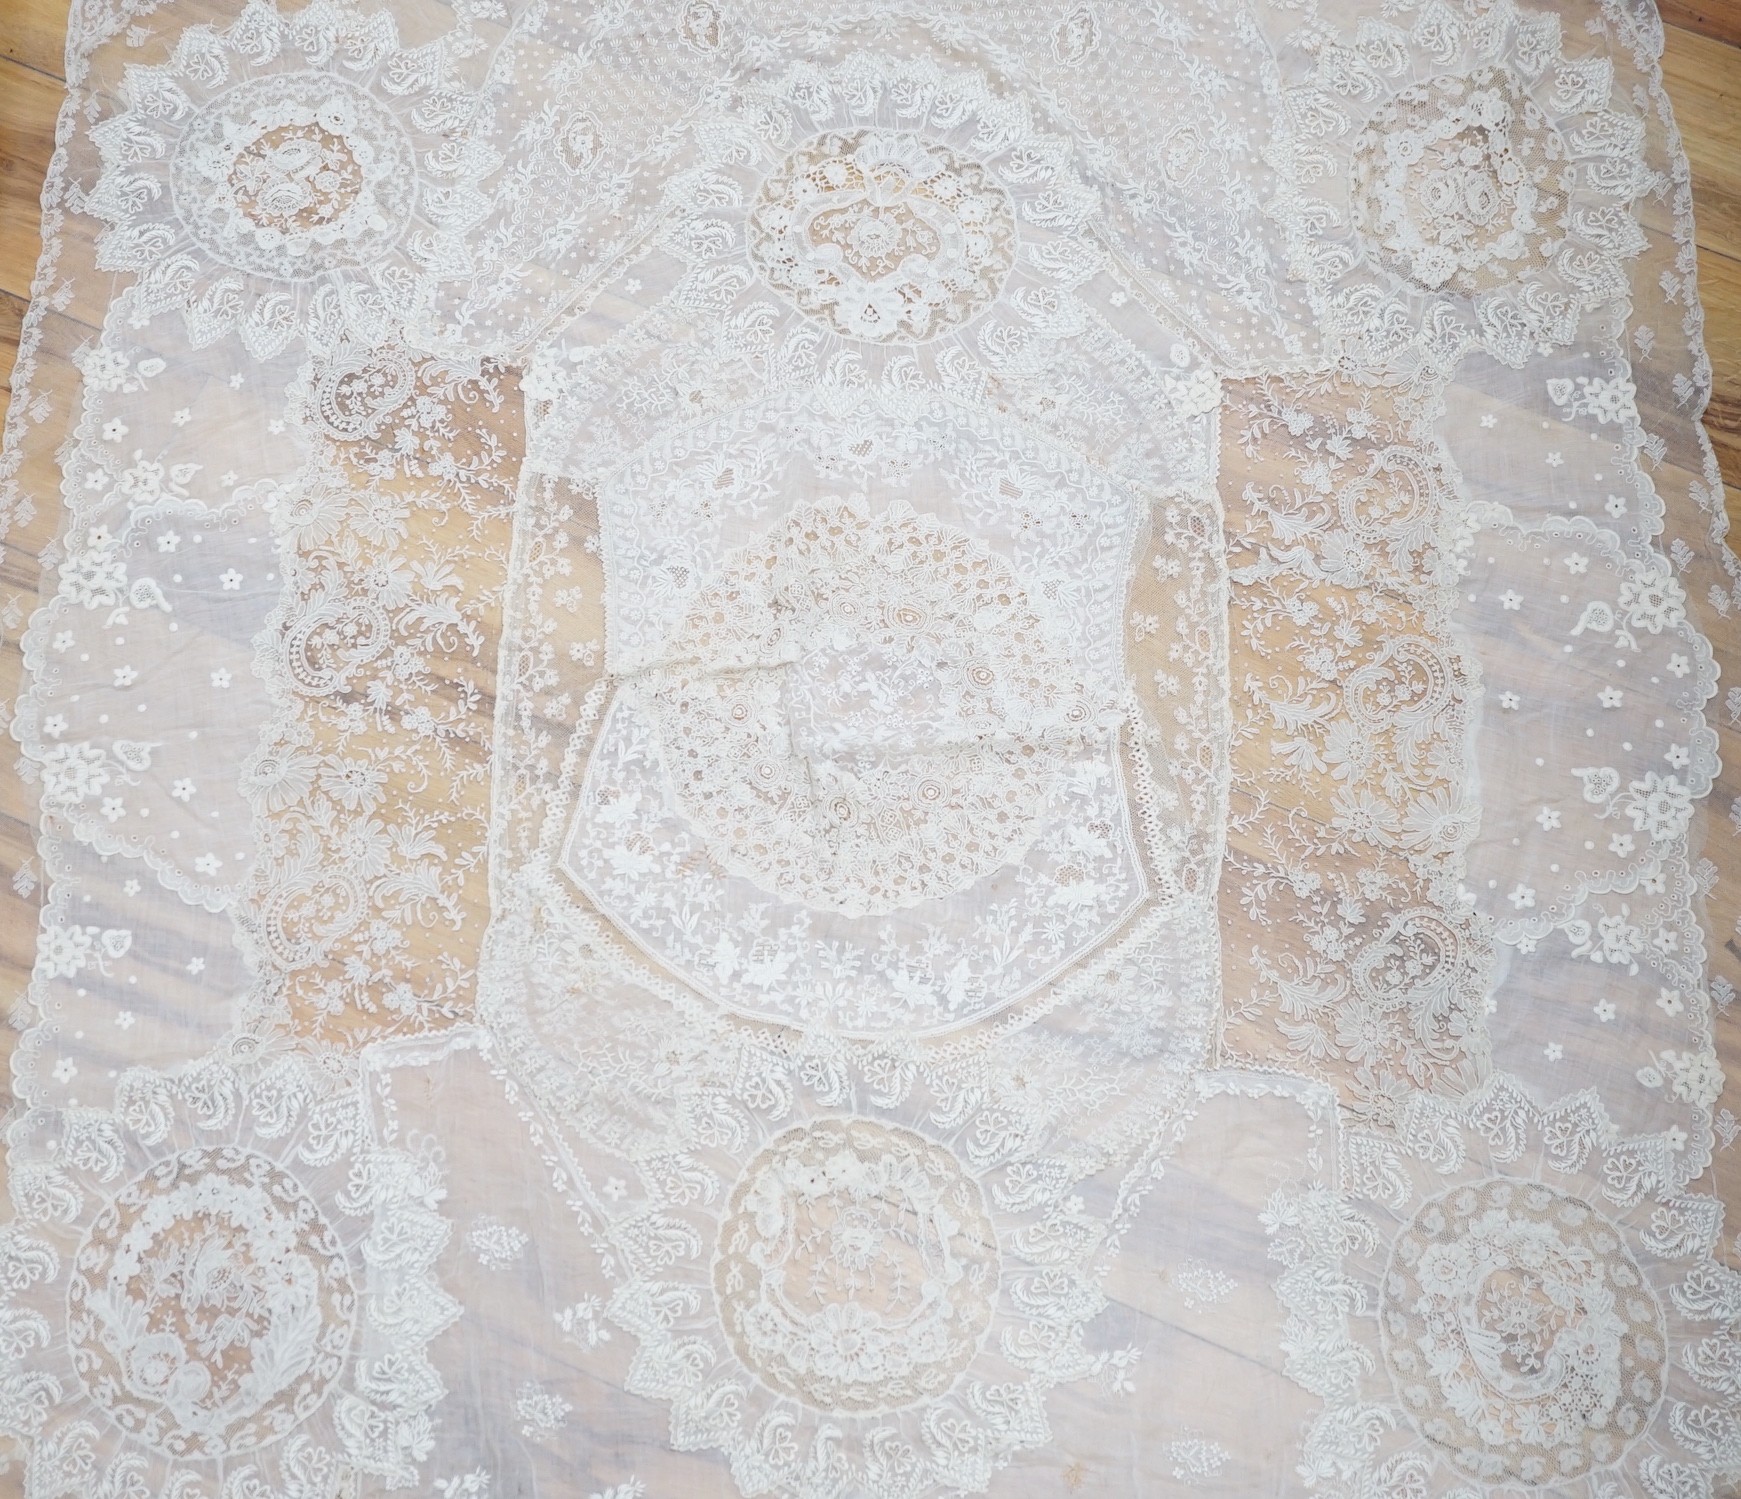 A late 19th century Normandy lace table cover of hand spun linen, hand white worked, with Brussels Point de Gaze insertions and bobbin lace edging, together with two feathers and a net veil                               